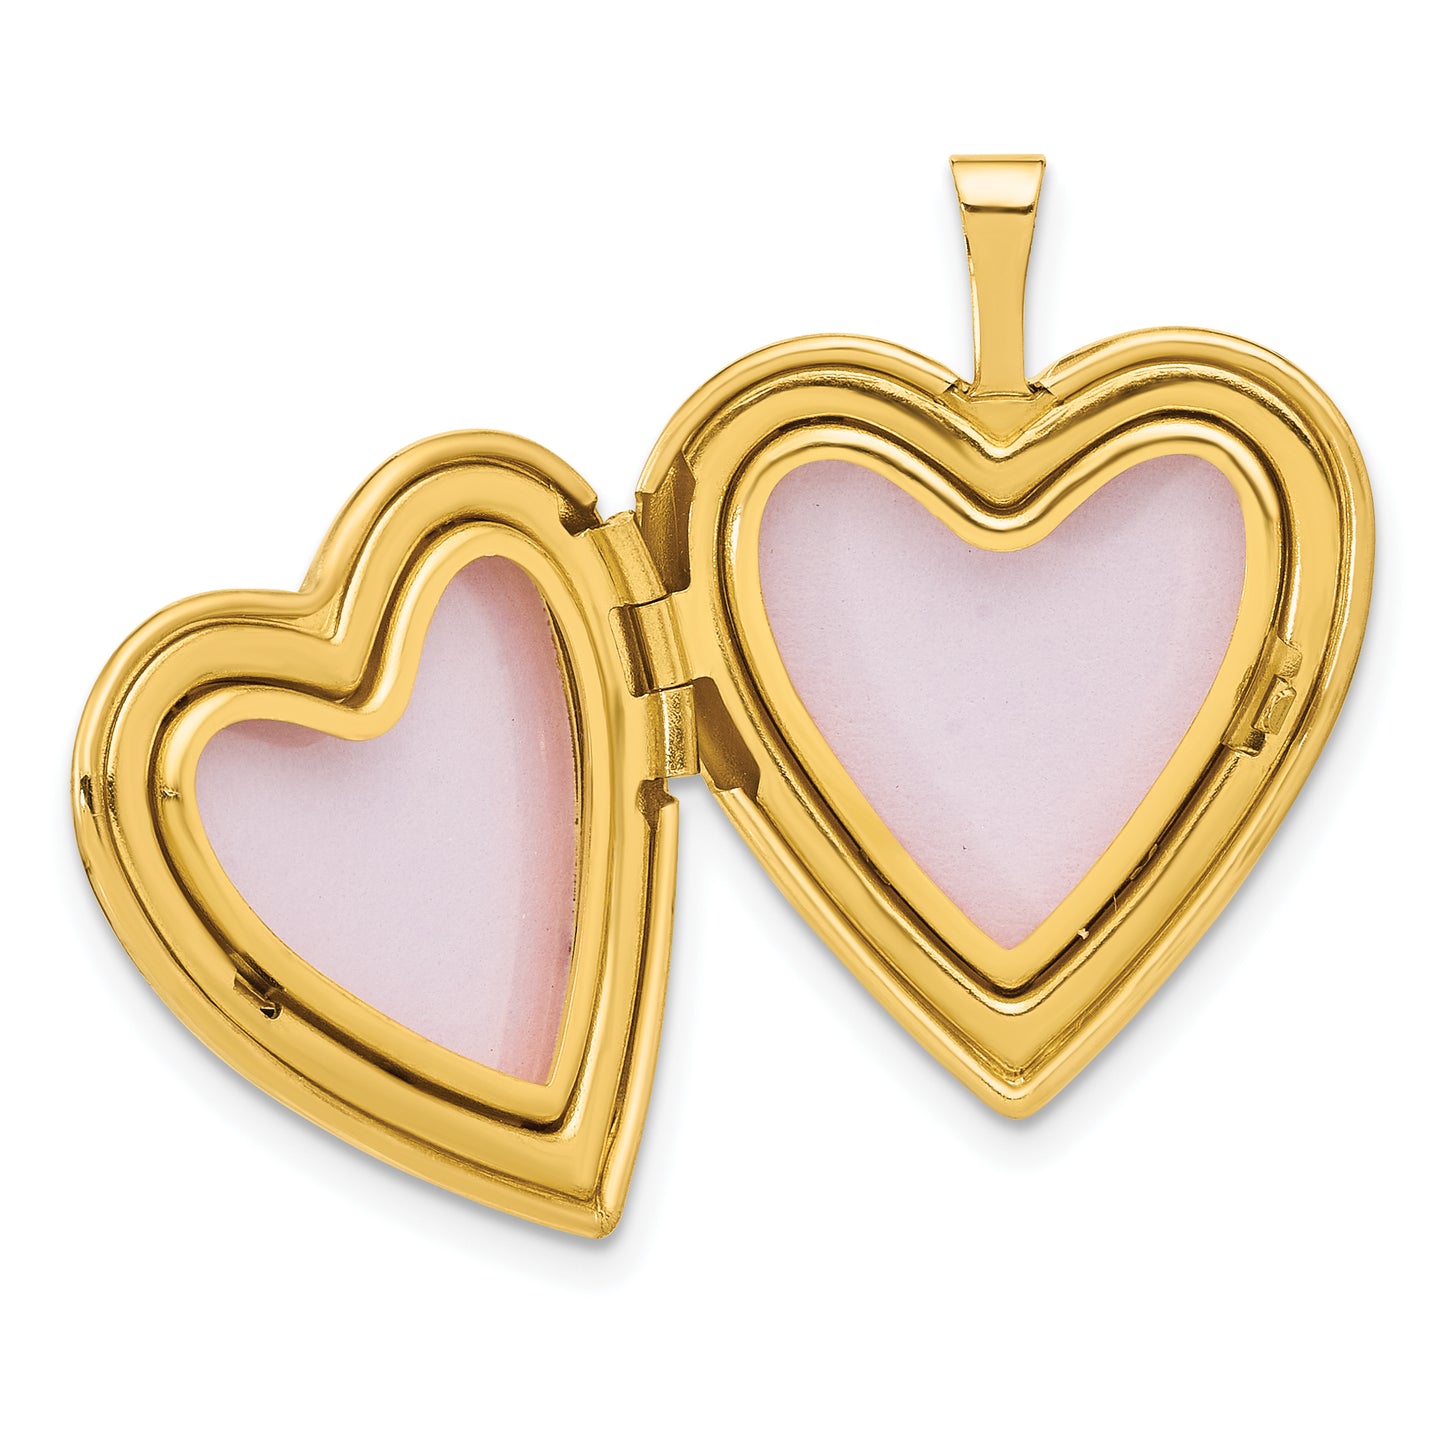 14K Textured and Polished Heart Design 20mm Heart Locket